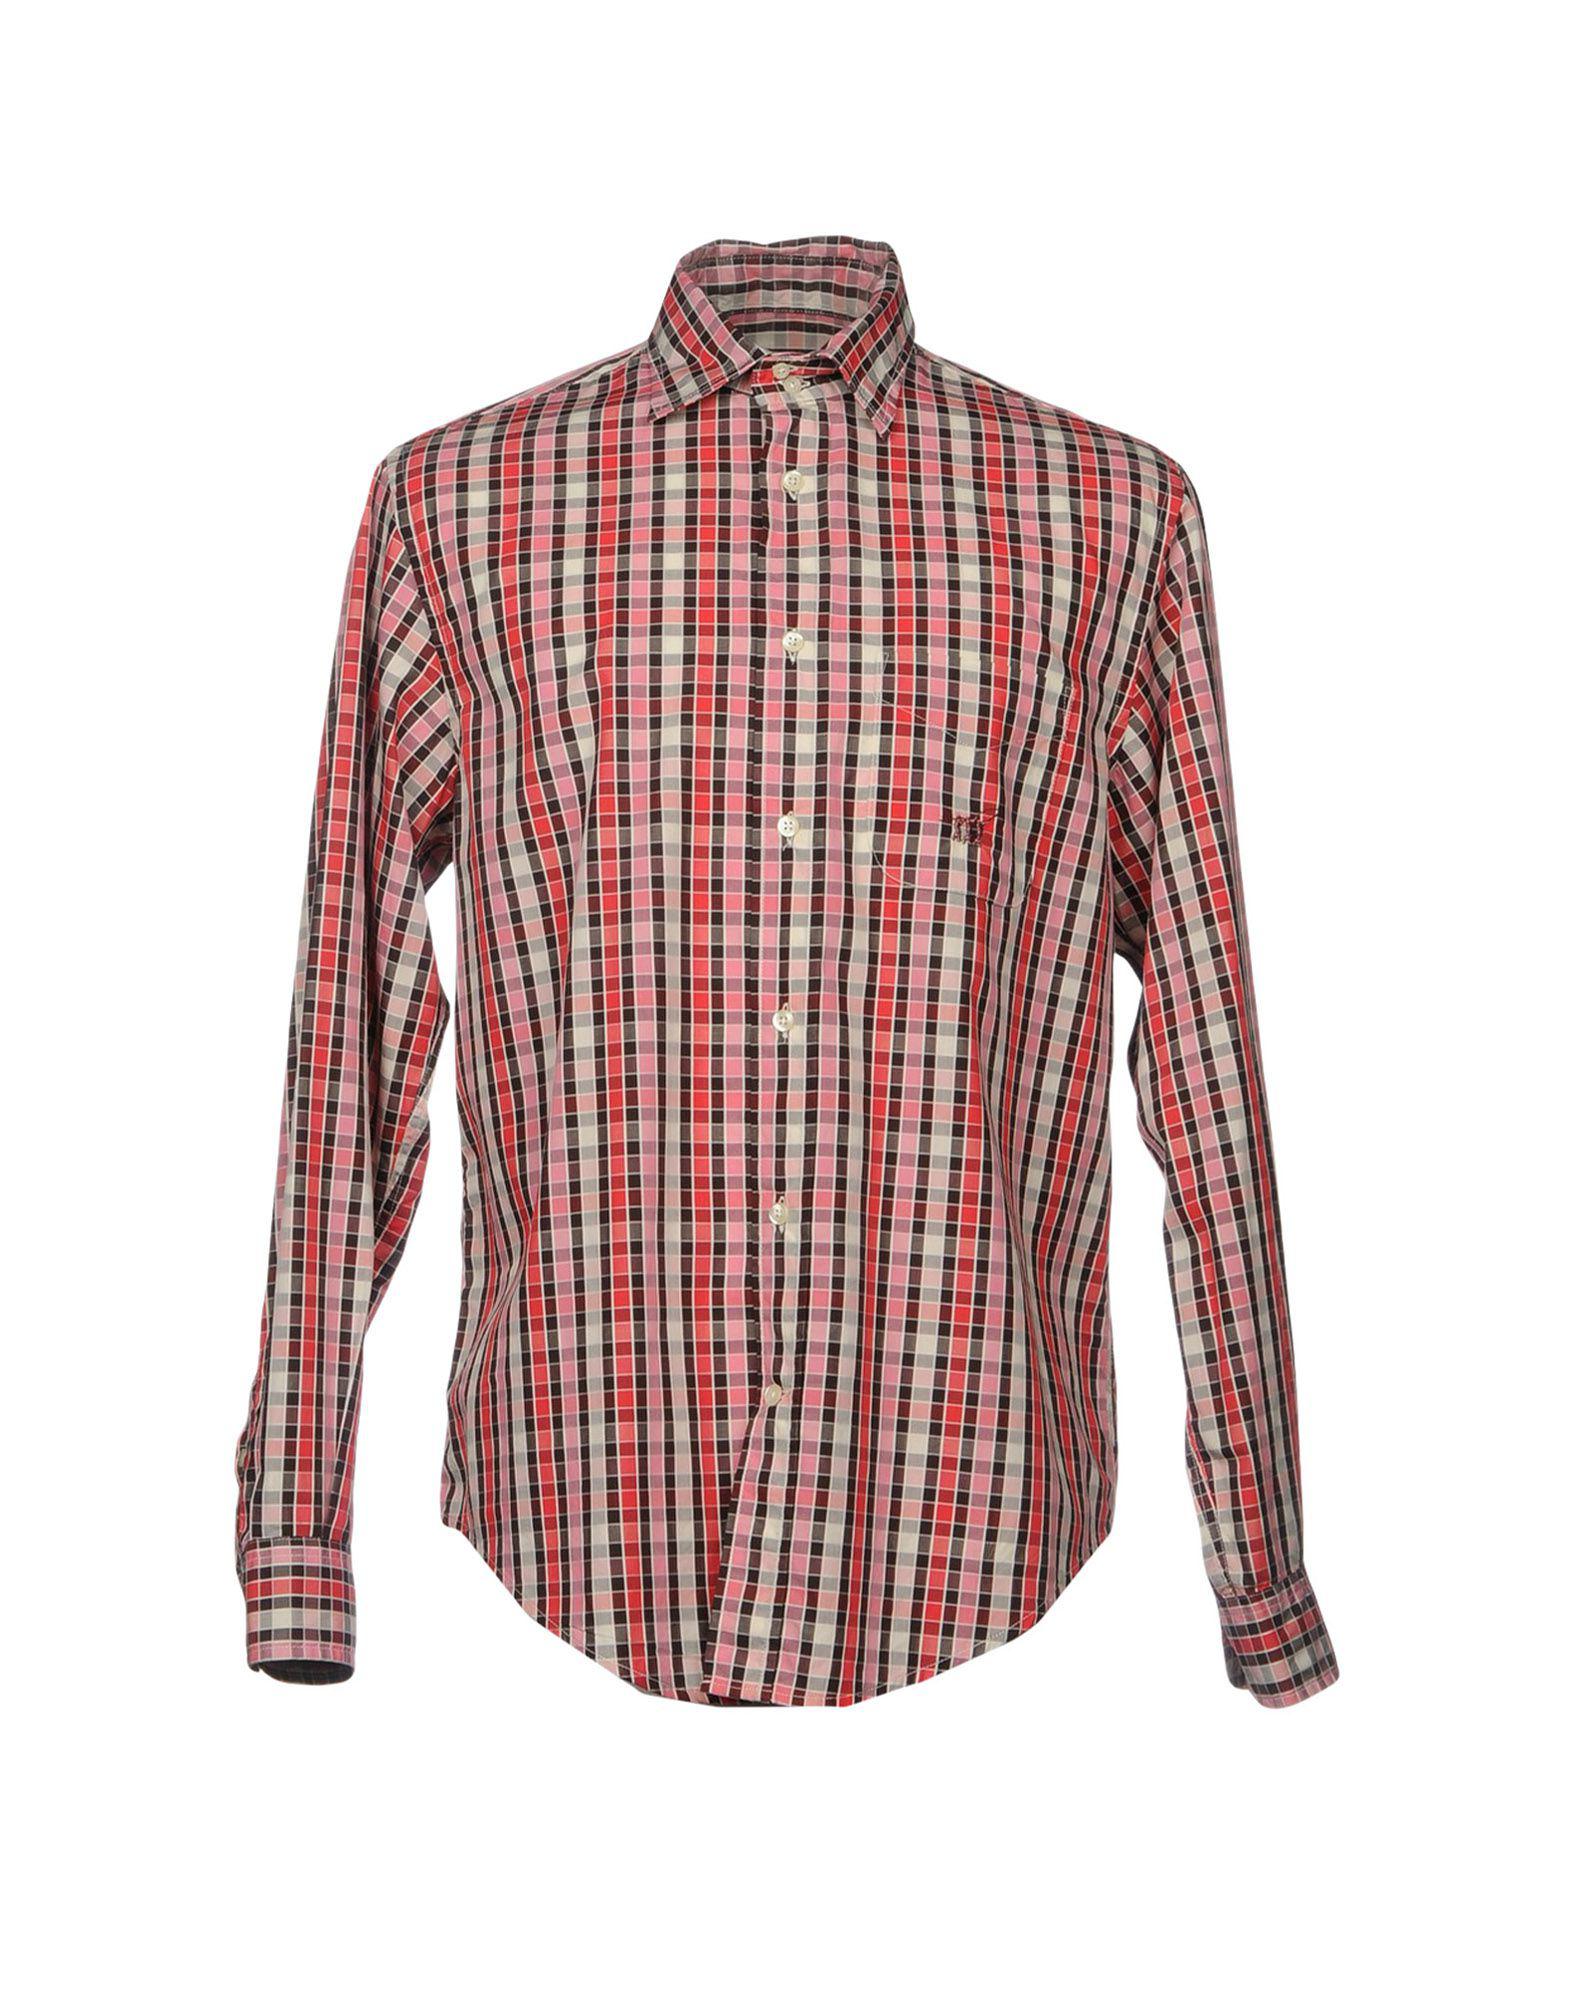 Henry Cotton's Cotton Shirt in Fuchsia (Red) for Men - Lyst